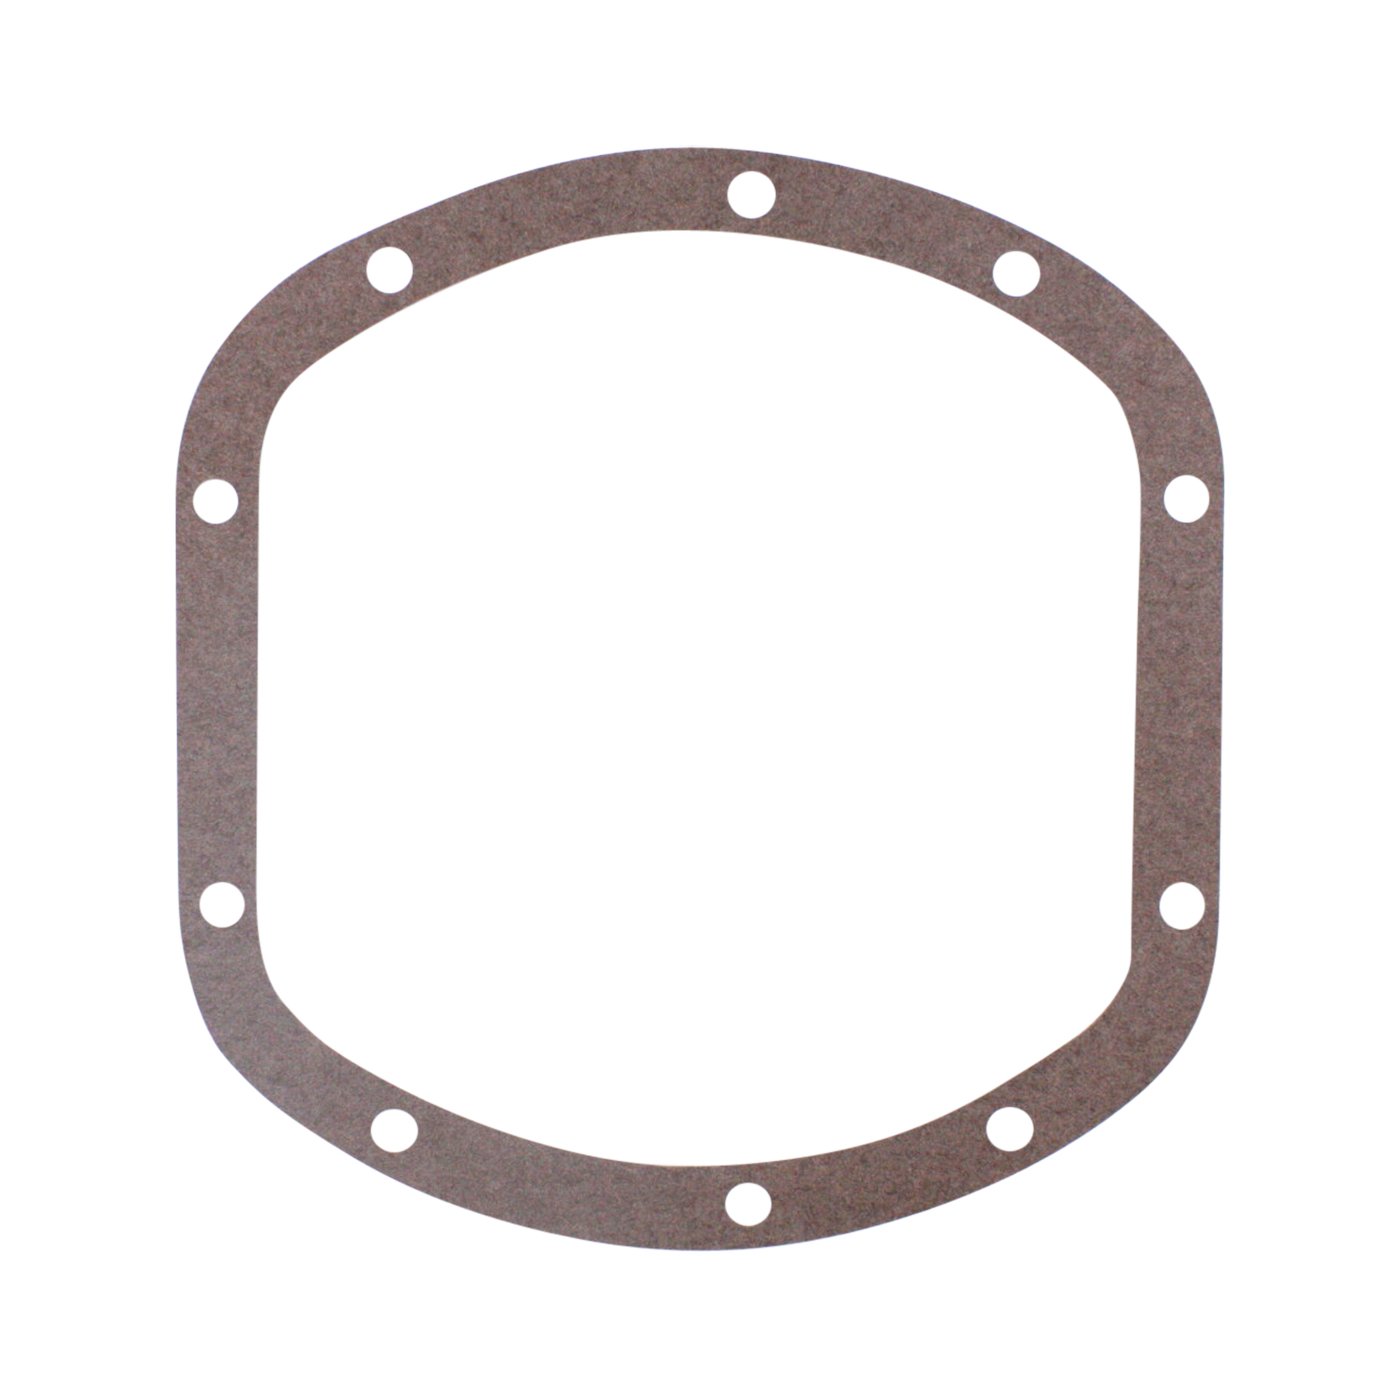 Replacement Quick Disconnect Gasket For Dana 30, Dana